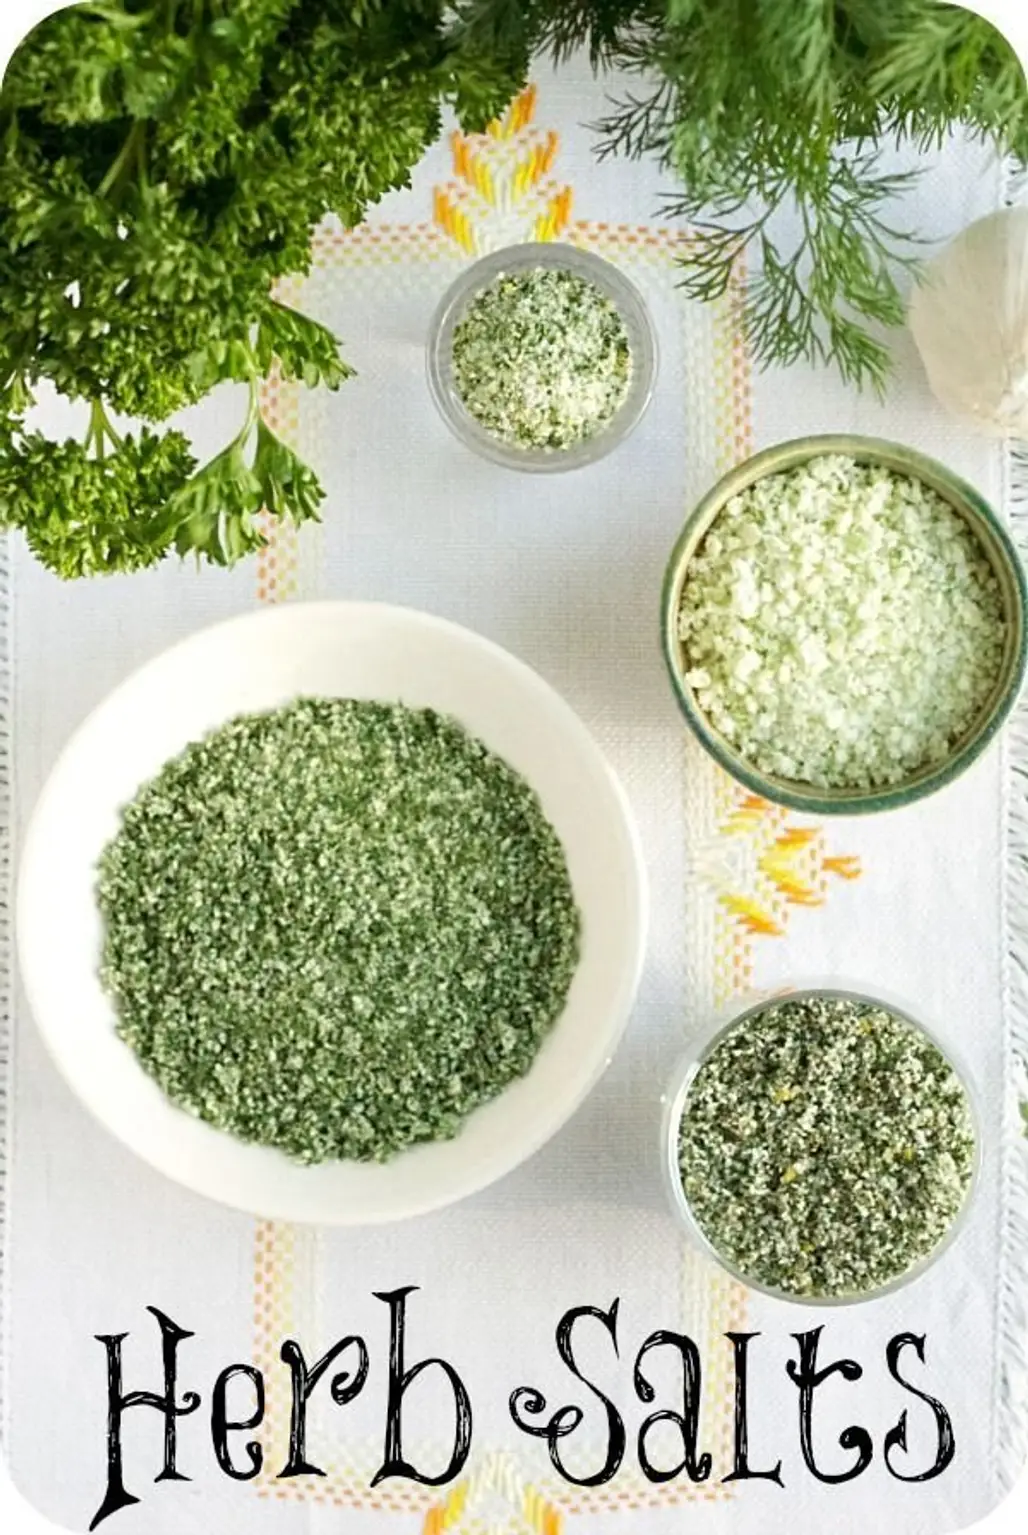 Make Your Own Herbed Salts